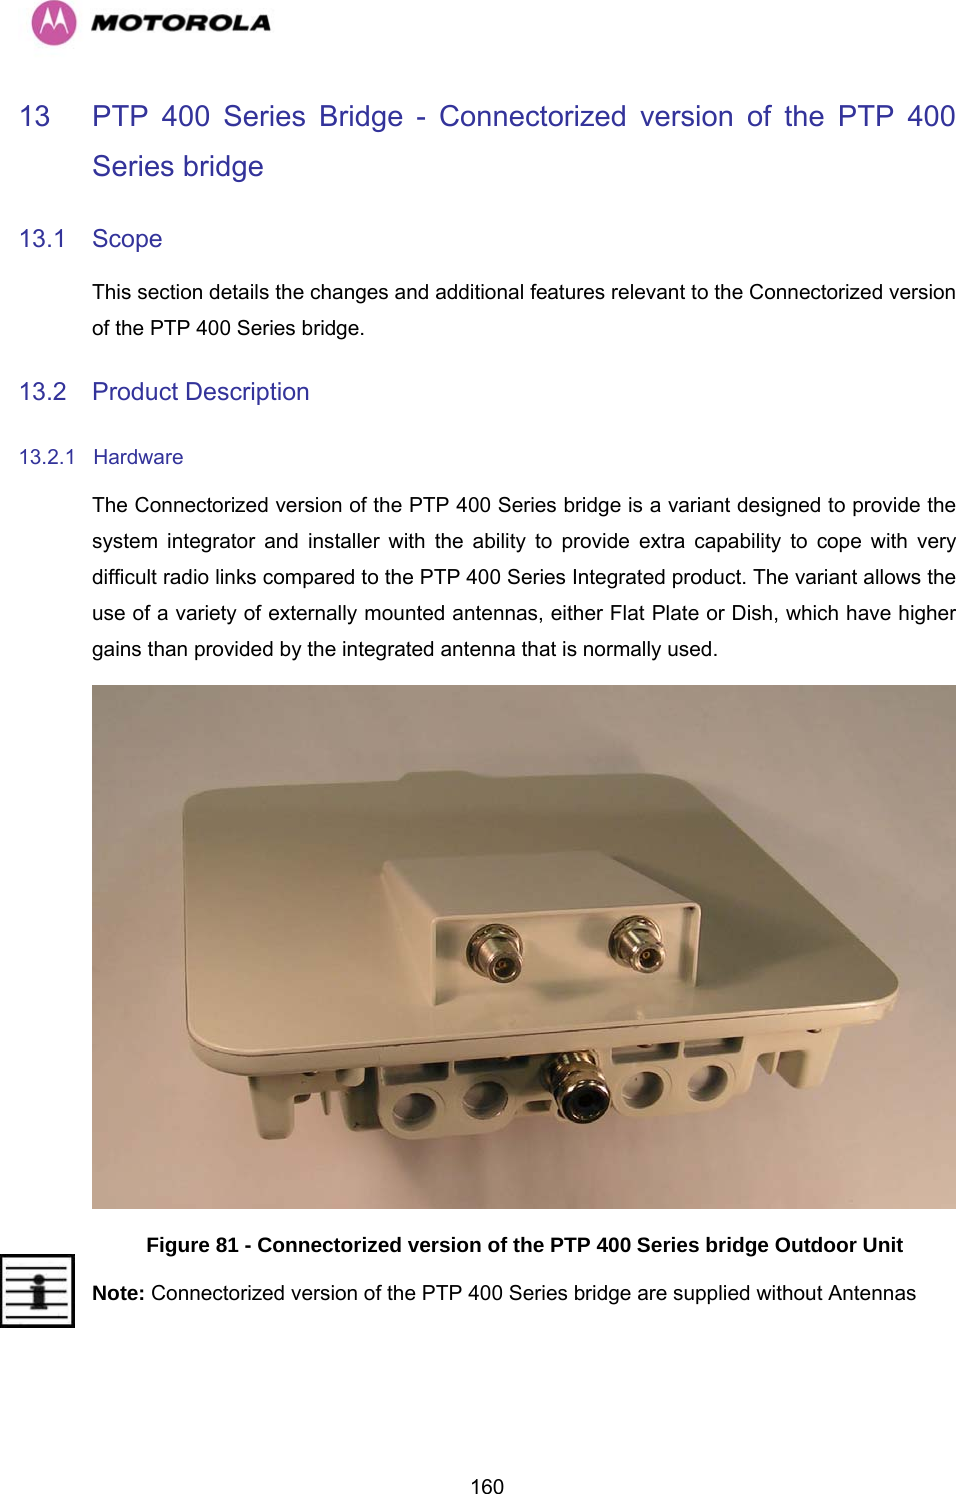   16013  PTP 400 Series Bridge - Connectorized version of the PTP 400 Series bridge  13.1 Scope This section details the changes and additional features relevant to the Connectorized version of the PTP 400 Series bridge. 13.2 Product Description 13.2.1 Hardware The Connectorized version of the PTP 400 Series bridge is a variant designed to provide the system integrator and installer with the ability to provide extra capability to cope with very difficult radio links compared to the PTP 400 Series Integrated product. The variant allows the use of a variety of externally mounted antennas, either Flat Plate or Dish, which have higher gains than provided by the integrated antenna that is normally used.  Figure 81 - Connectorized version of the PTP 400 Series bridge Outdoor Unit Note: Connectorized version of the PTP 400 Series bridge are supplied without Antennas  